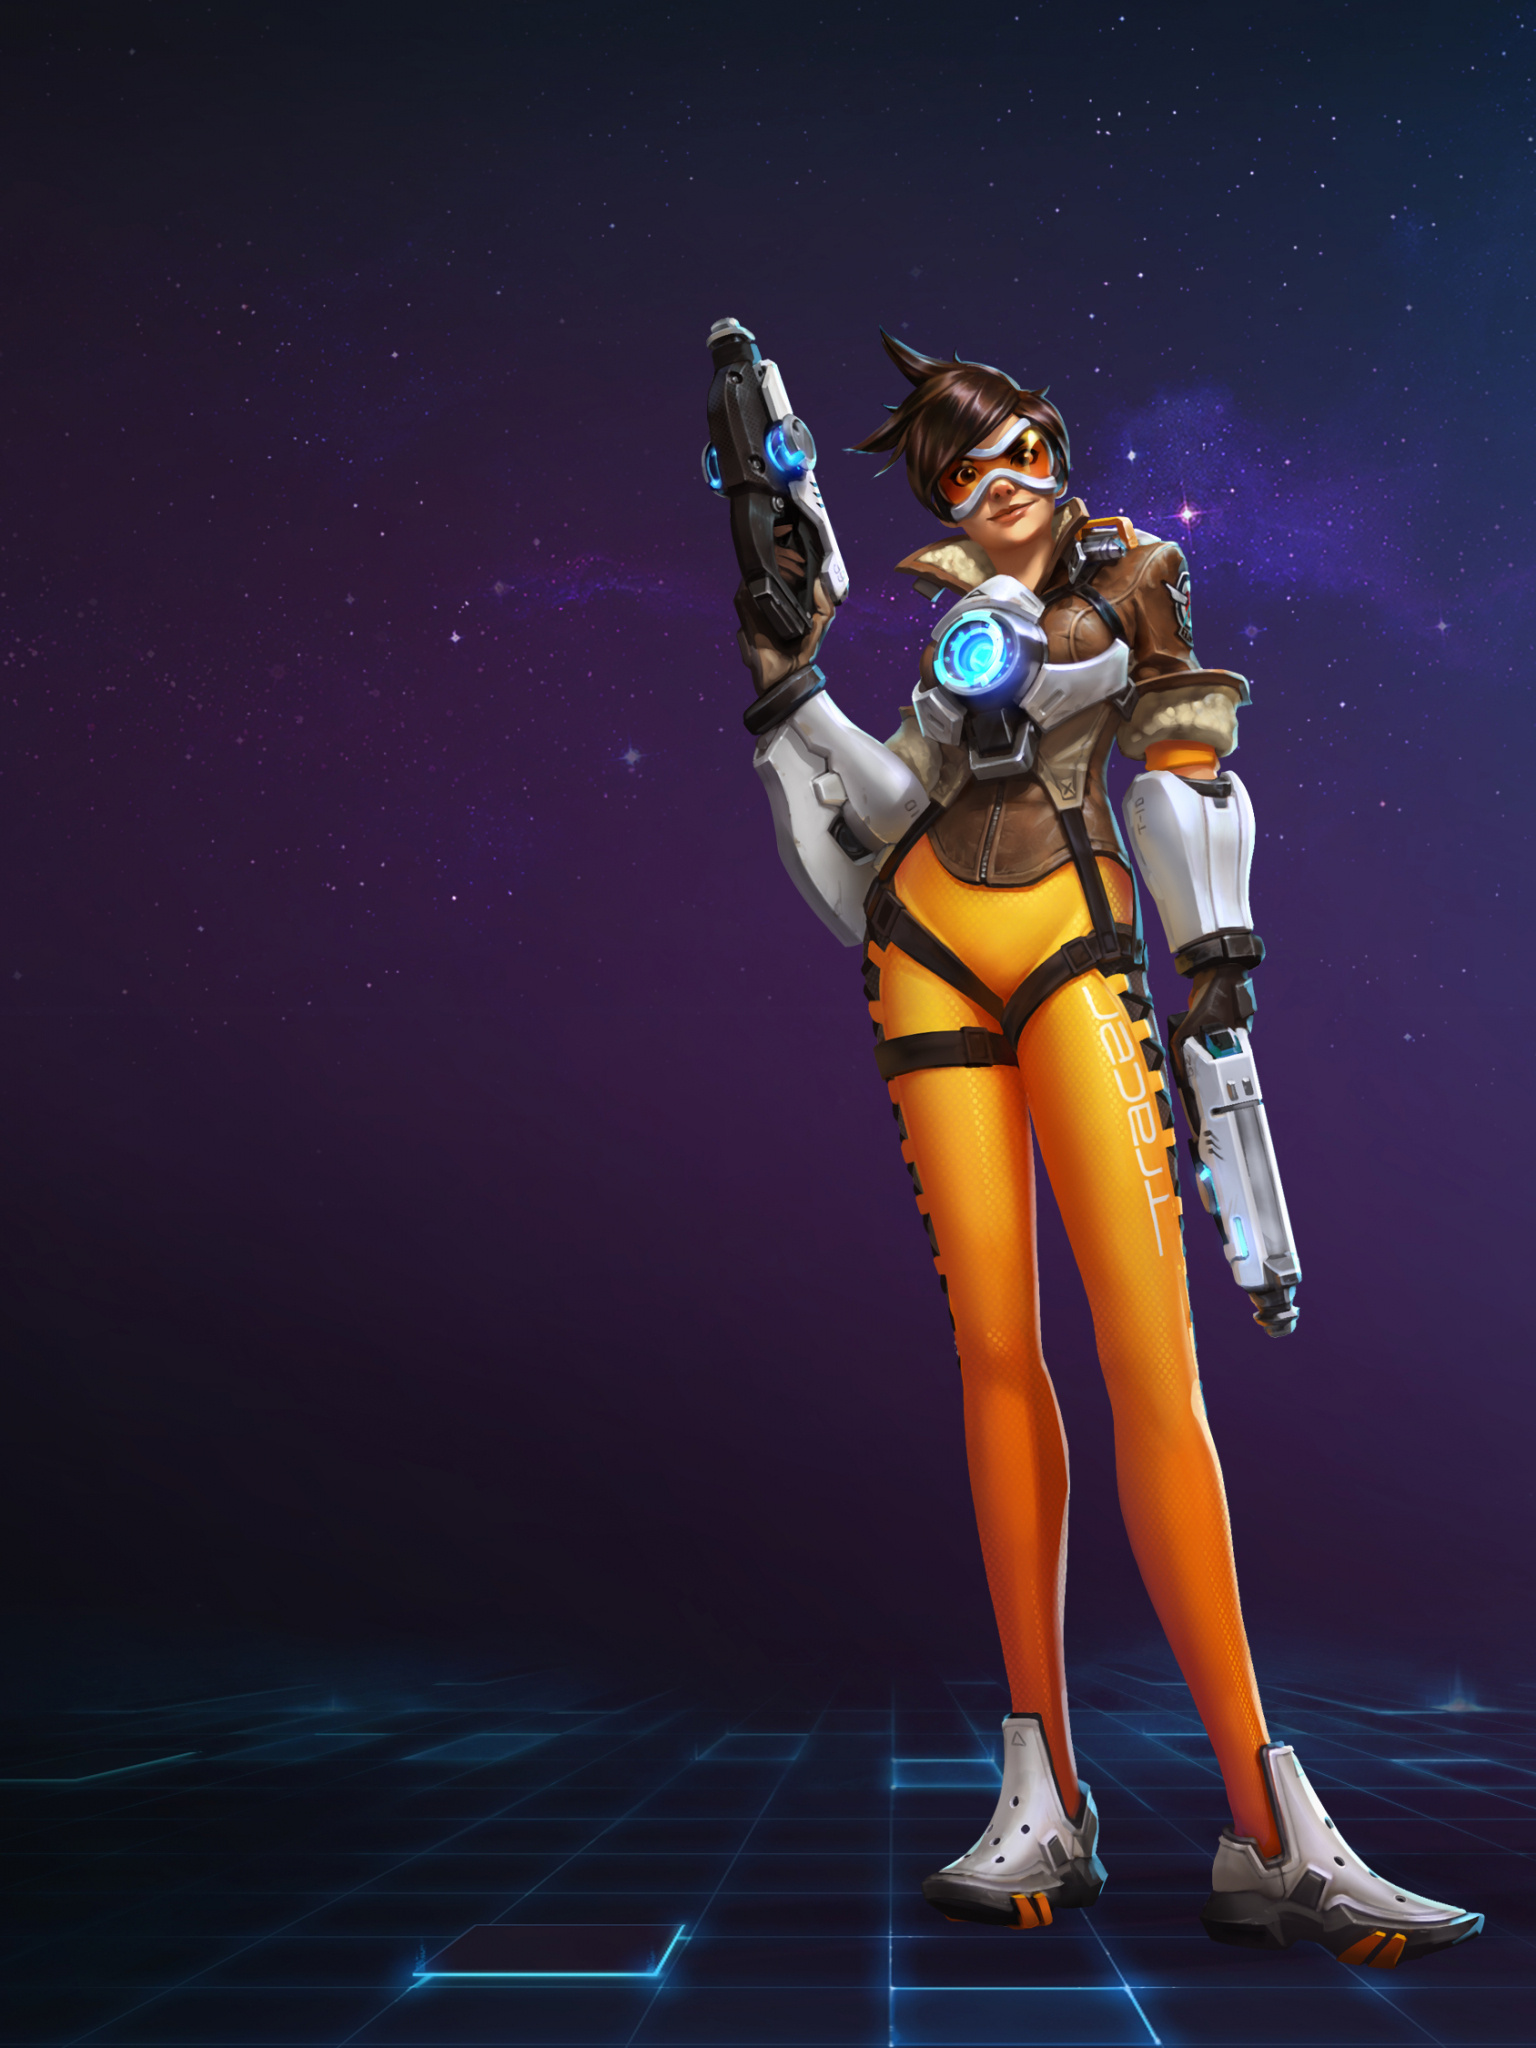 Heroes of the Storm, Tracer wallpaper, 61887 3600x2250px, Desktop mobile tablet, 1540x2050 HD Handy